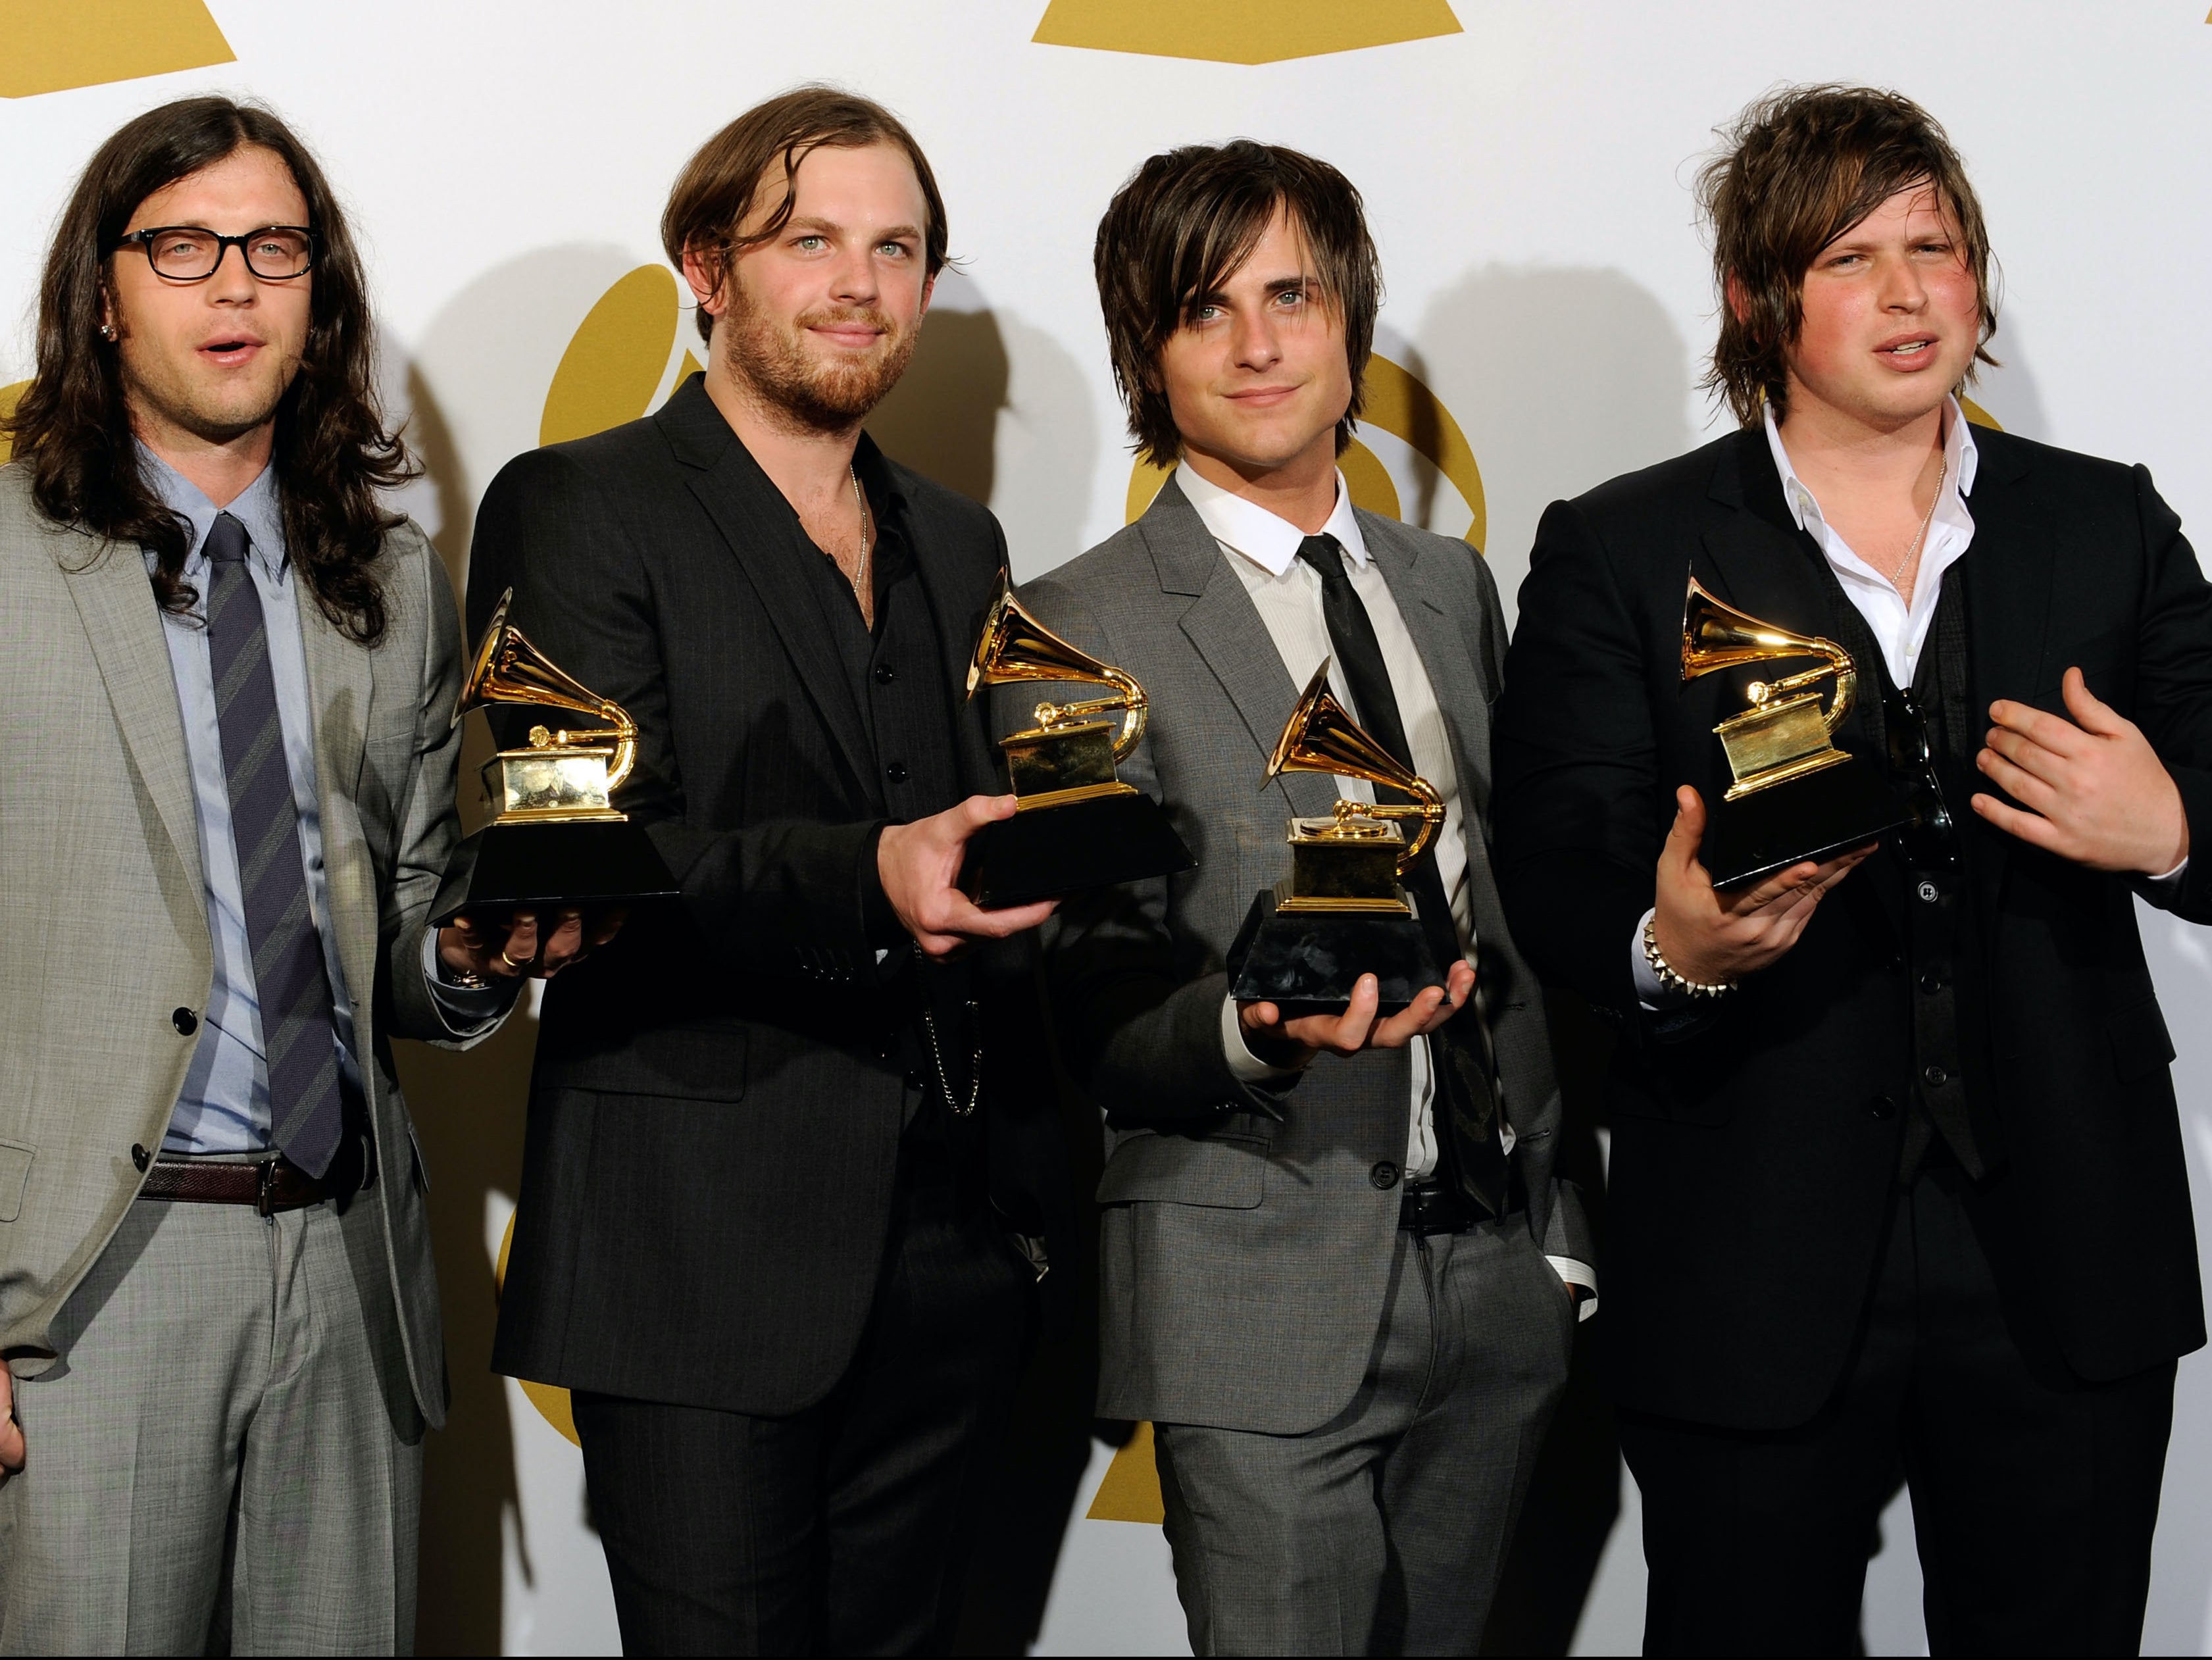 At the Grammys in 2010